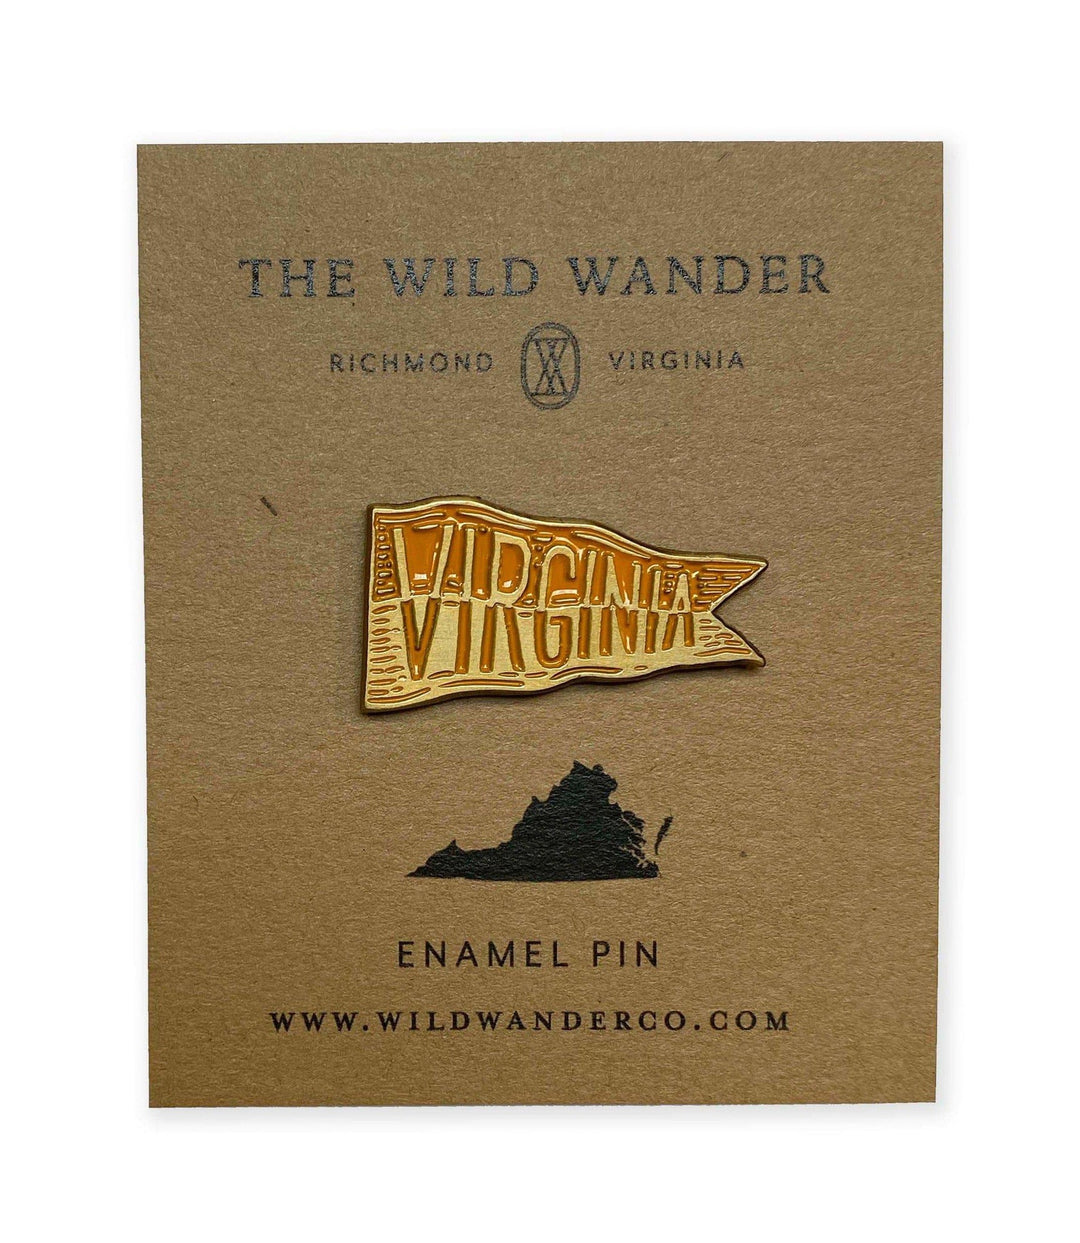 The Virginia Flag Enamel Pin from The Wild Wander.